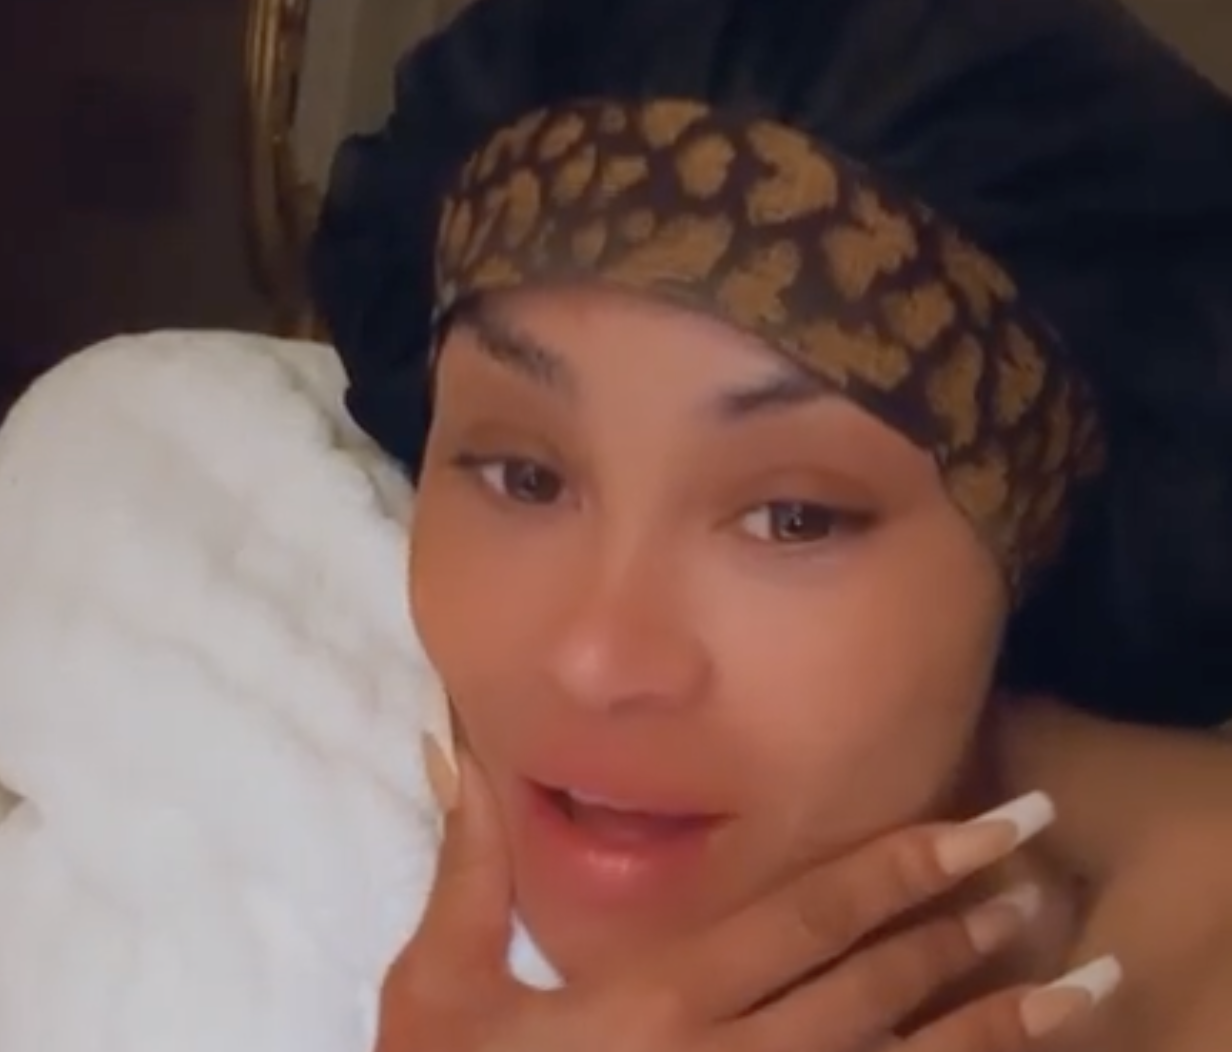 Blac Chyna Reacts to the ‘Crazy’ Face She Had Before Removing Her Filler [Video]